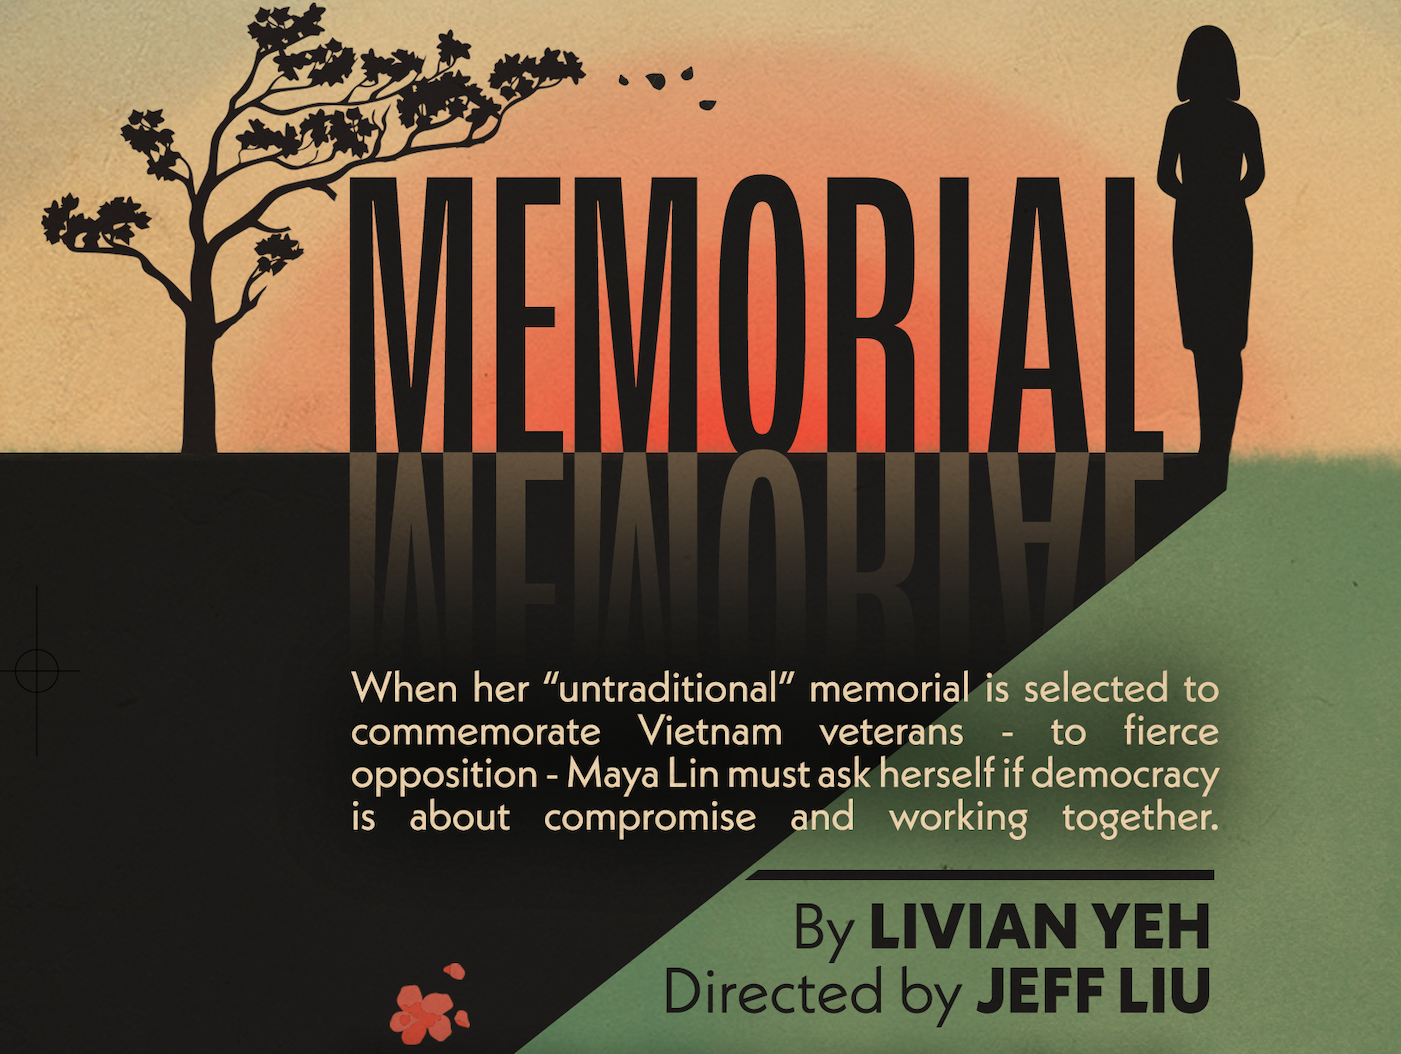 Memorial graphic features silhouette of tree, person with chin length hair wearing a dress, and the word "Memorial" in caps infant to a sun rising or setting with the Memorial word reflecting in the black below.